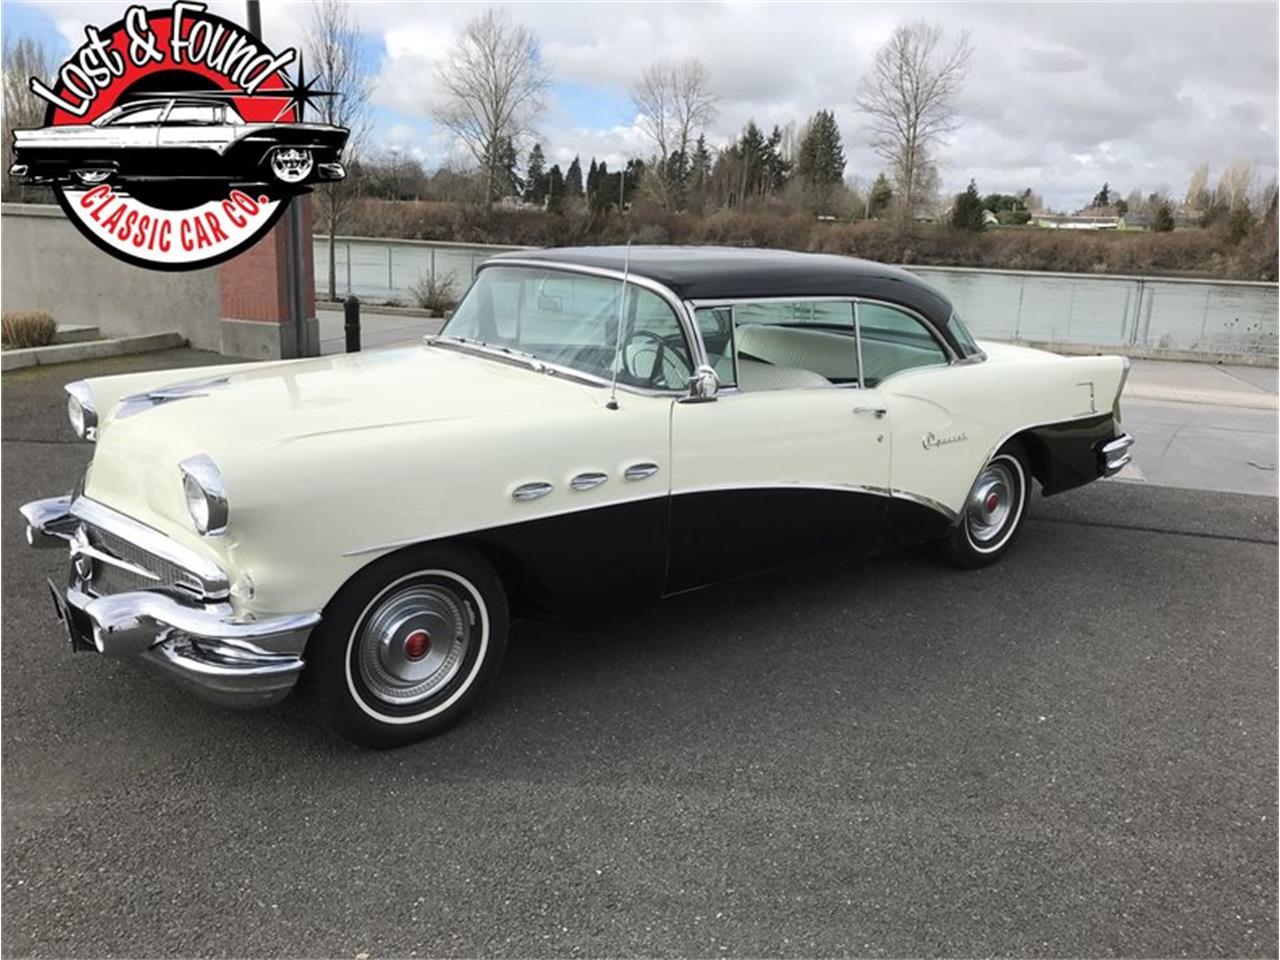 1956 buick special for sale classiccars com cc 1082343 1956 buick special for sale